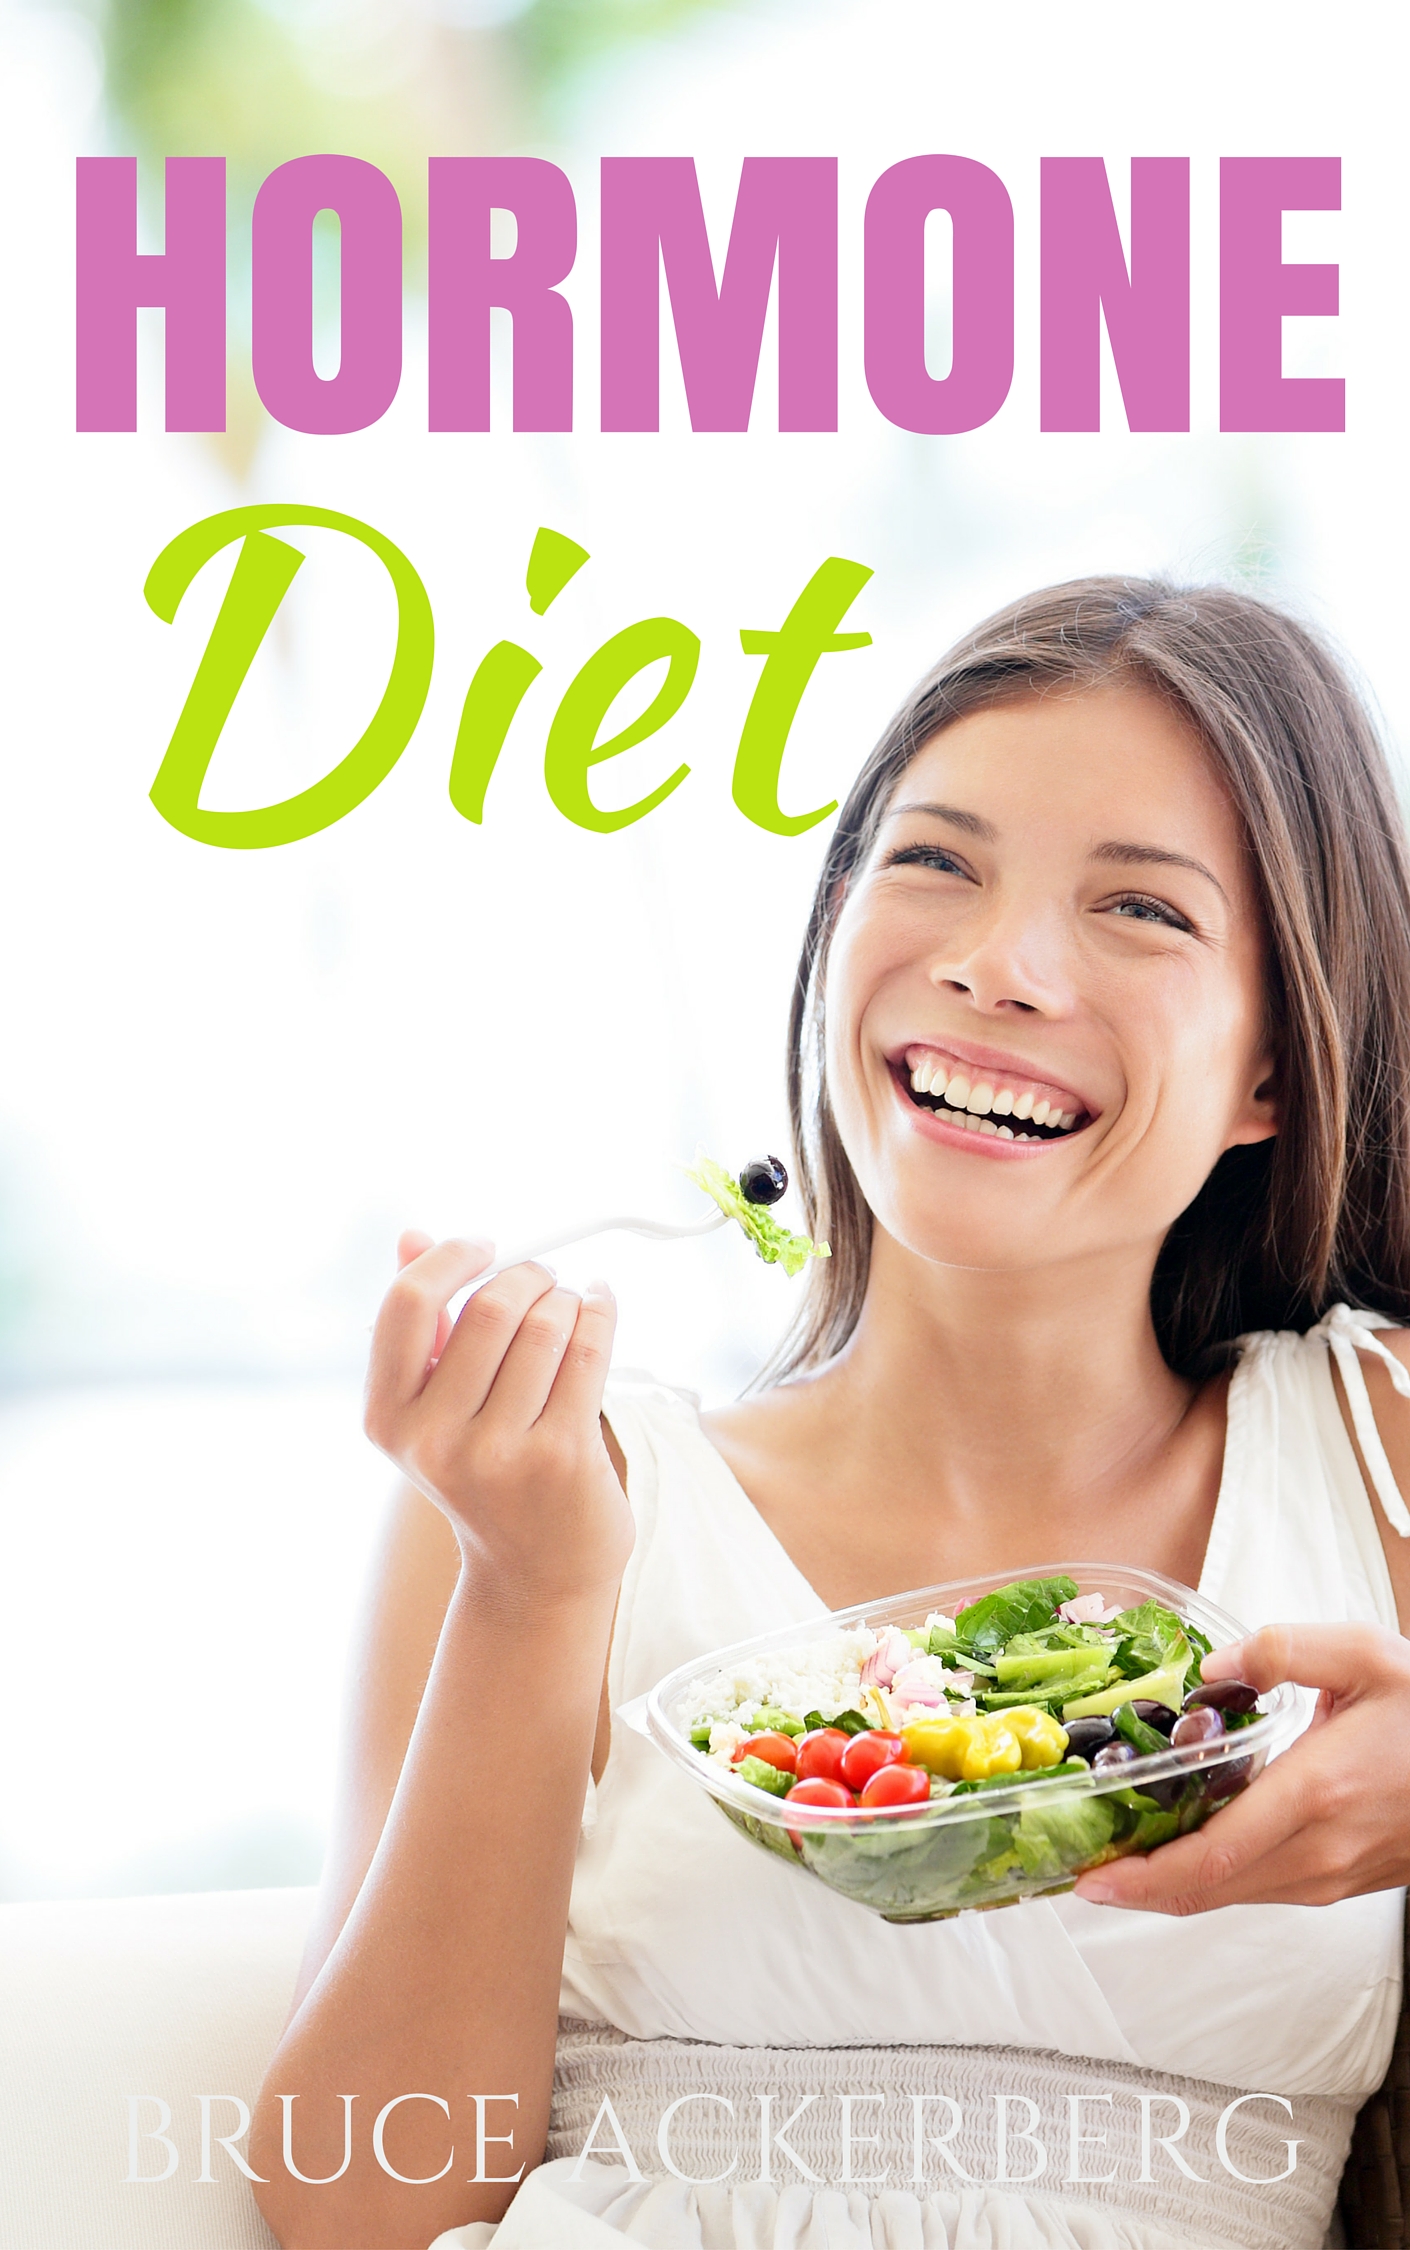 FREE: Hormone Diet: A Step by Step Guide for Beginners by Bruce Ackerberg